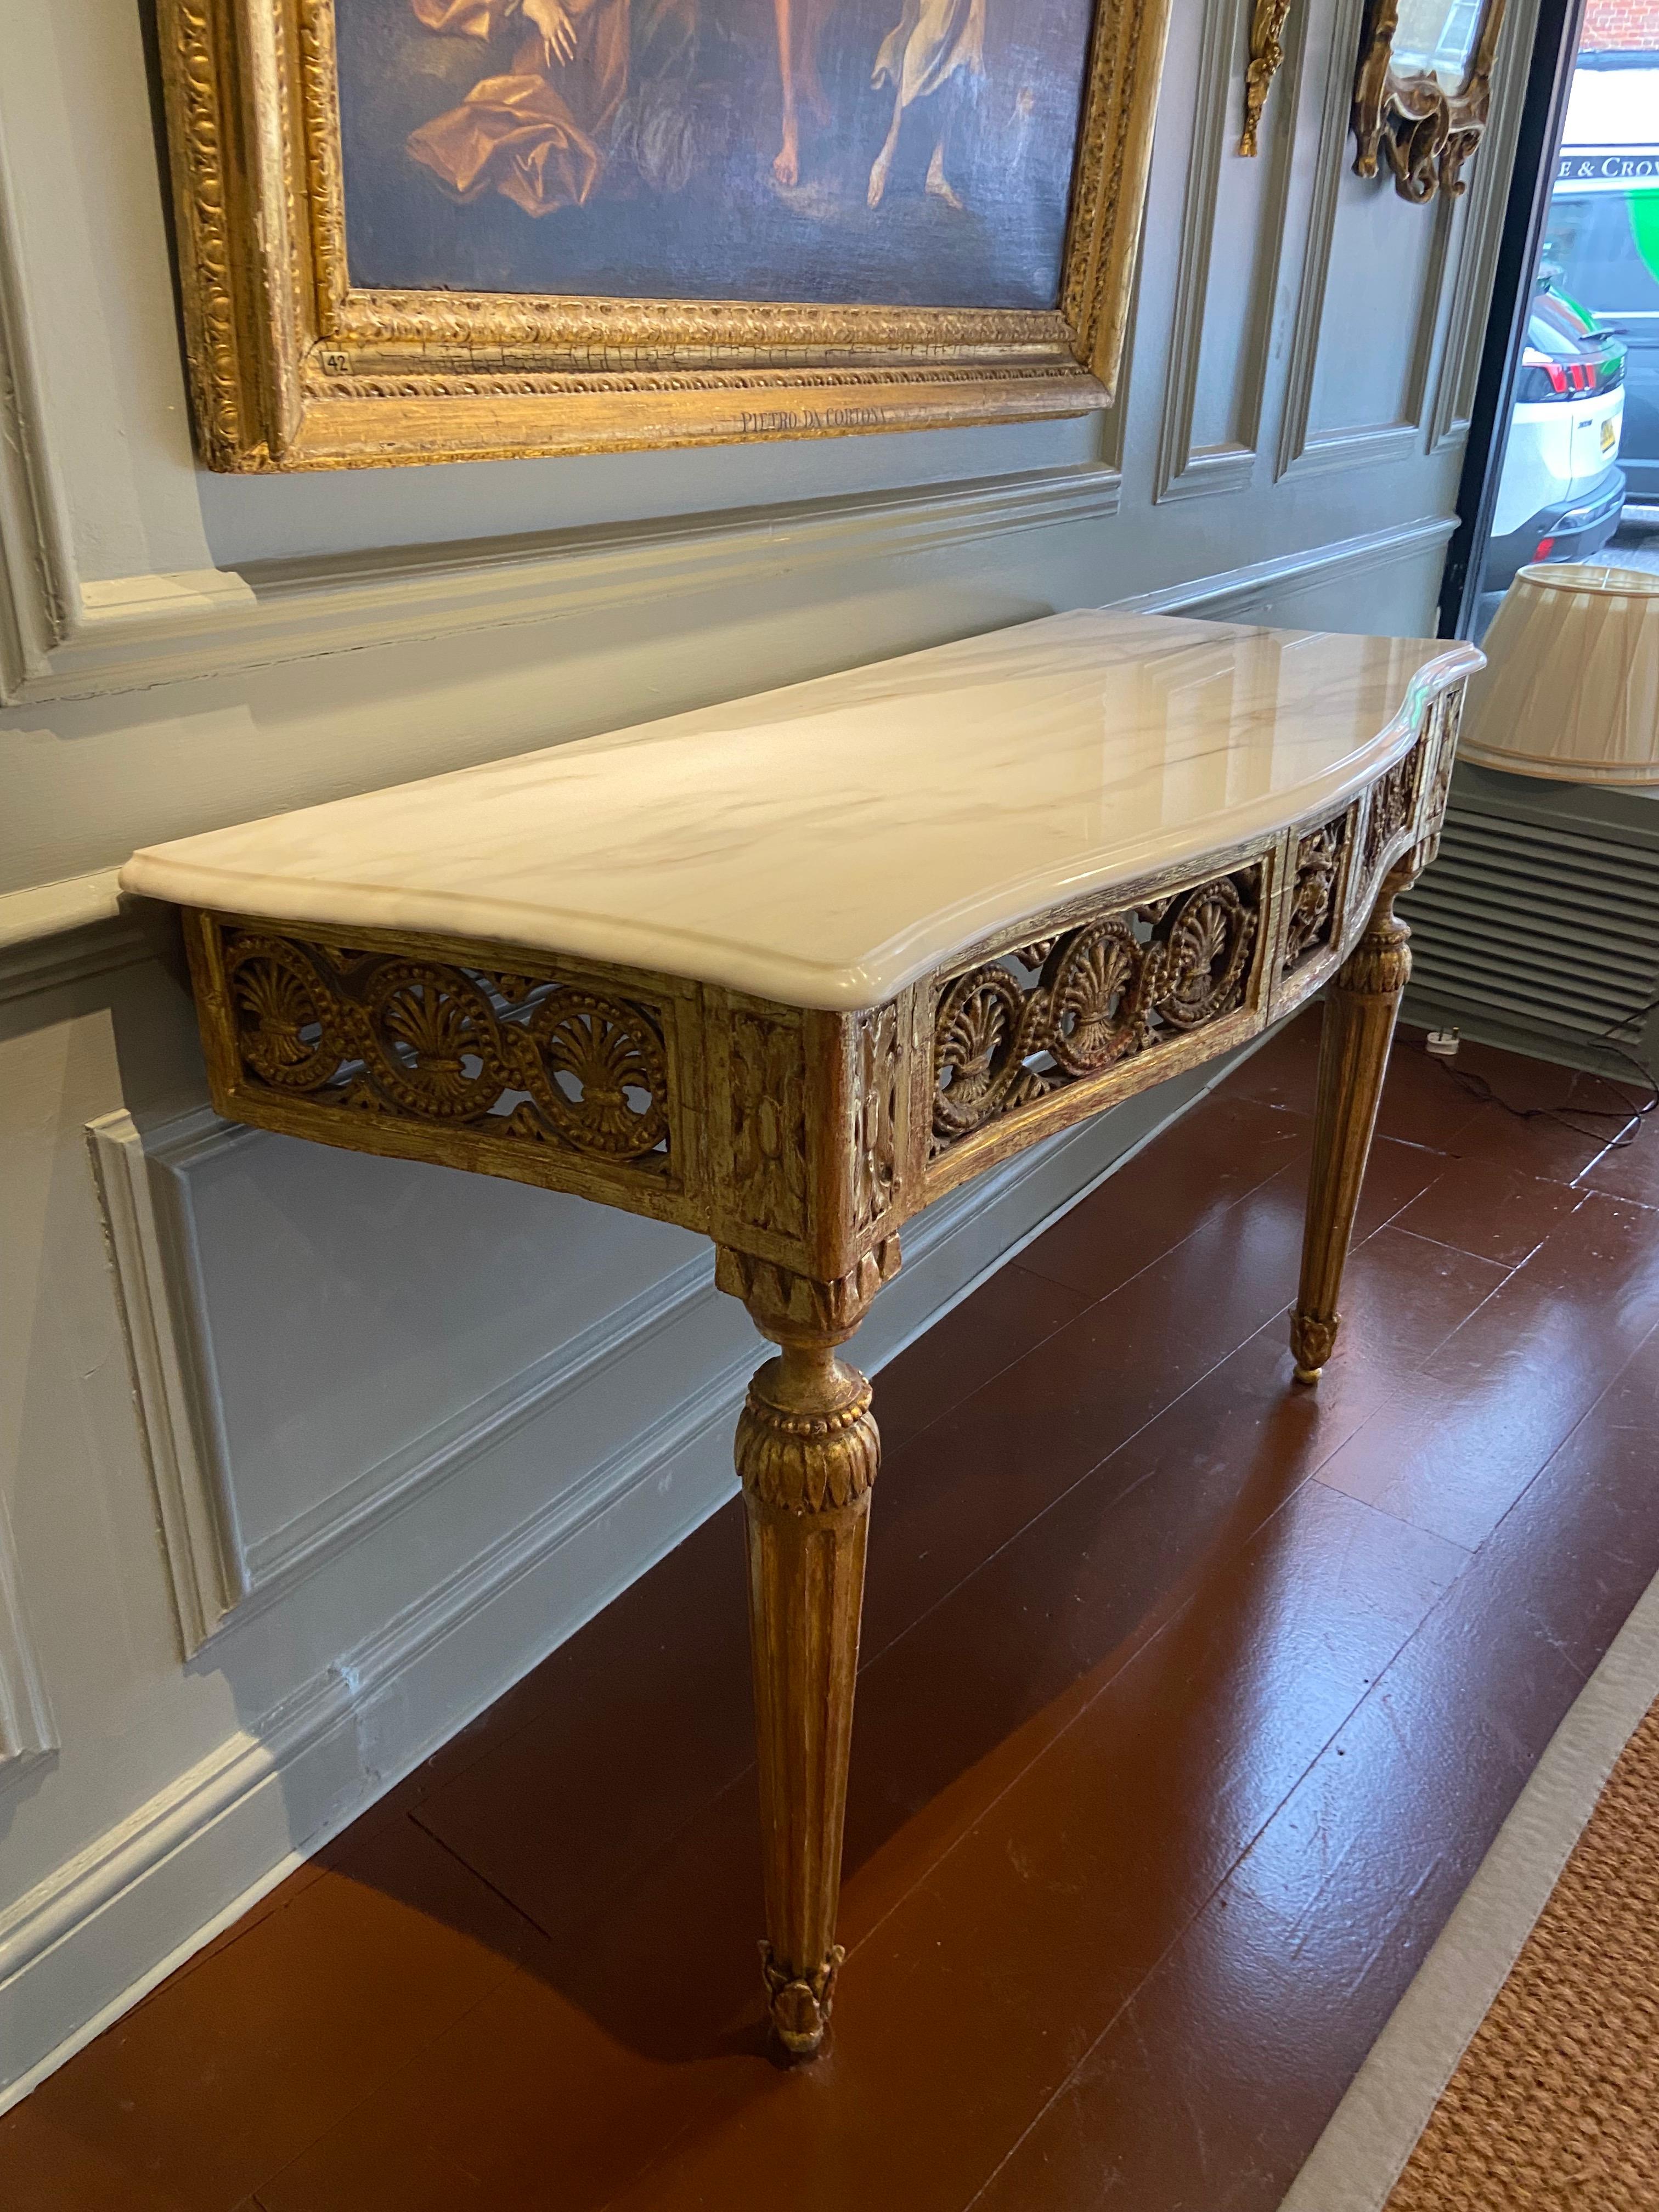 Northern Italian Serpentine Carved Gilt-Wood Console Table 'Late 18th Century' For Sale 7